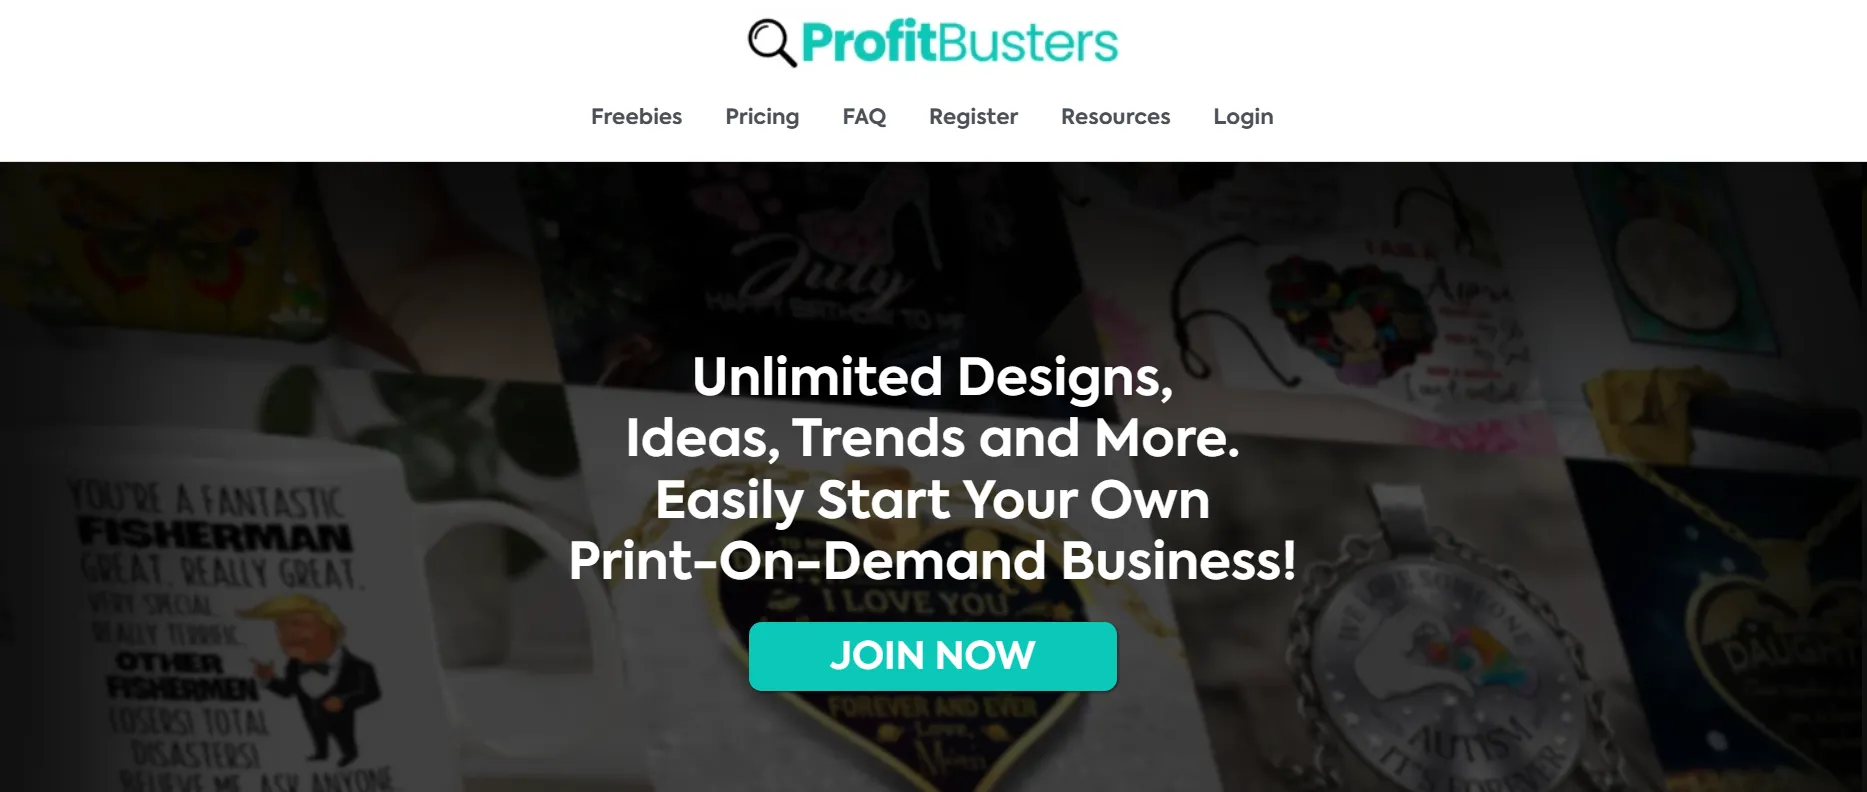 ProfitBusters Review